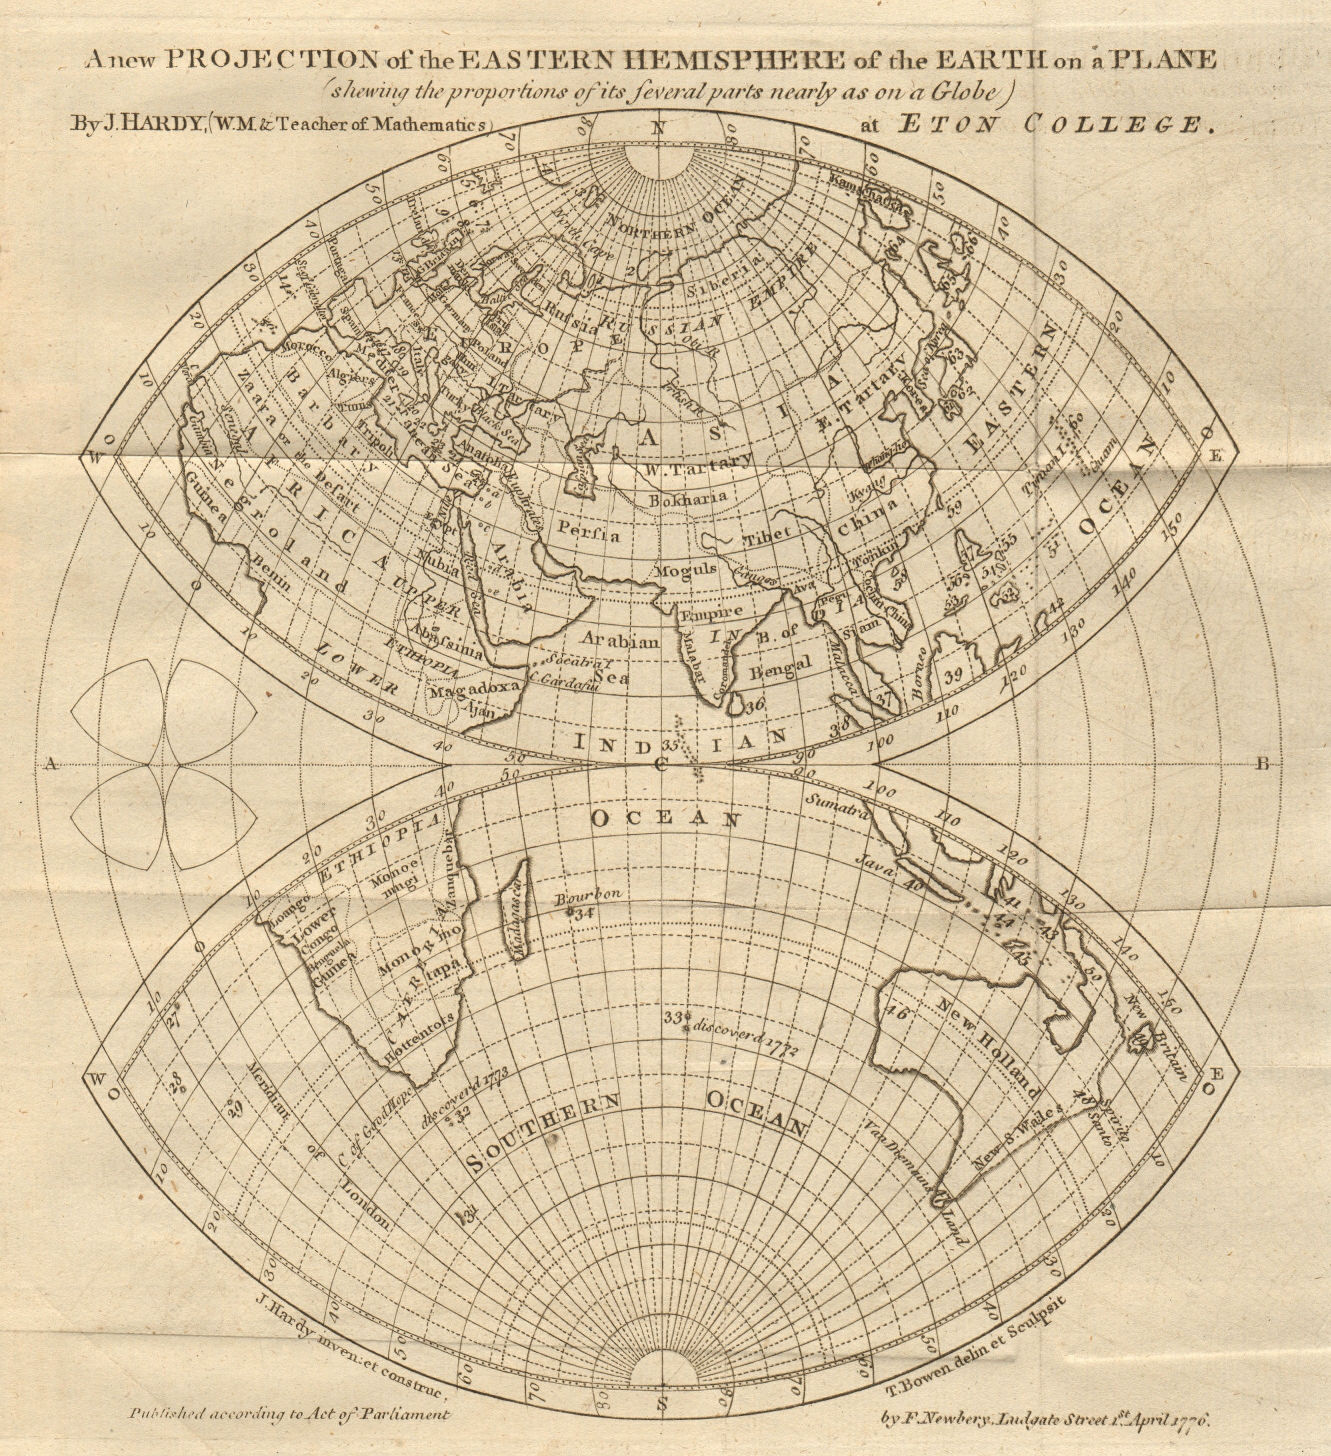 Projection of the Eastern Hemisphere of the Earth on a plane. BOWEN 1776 map